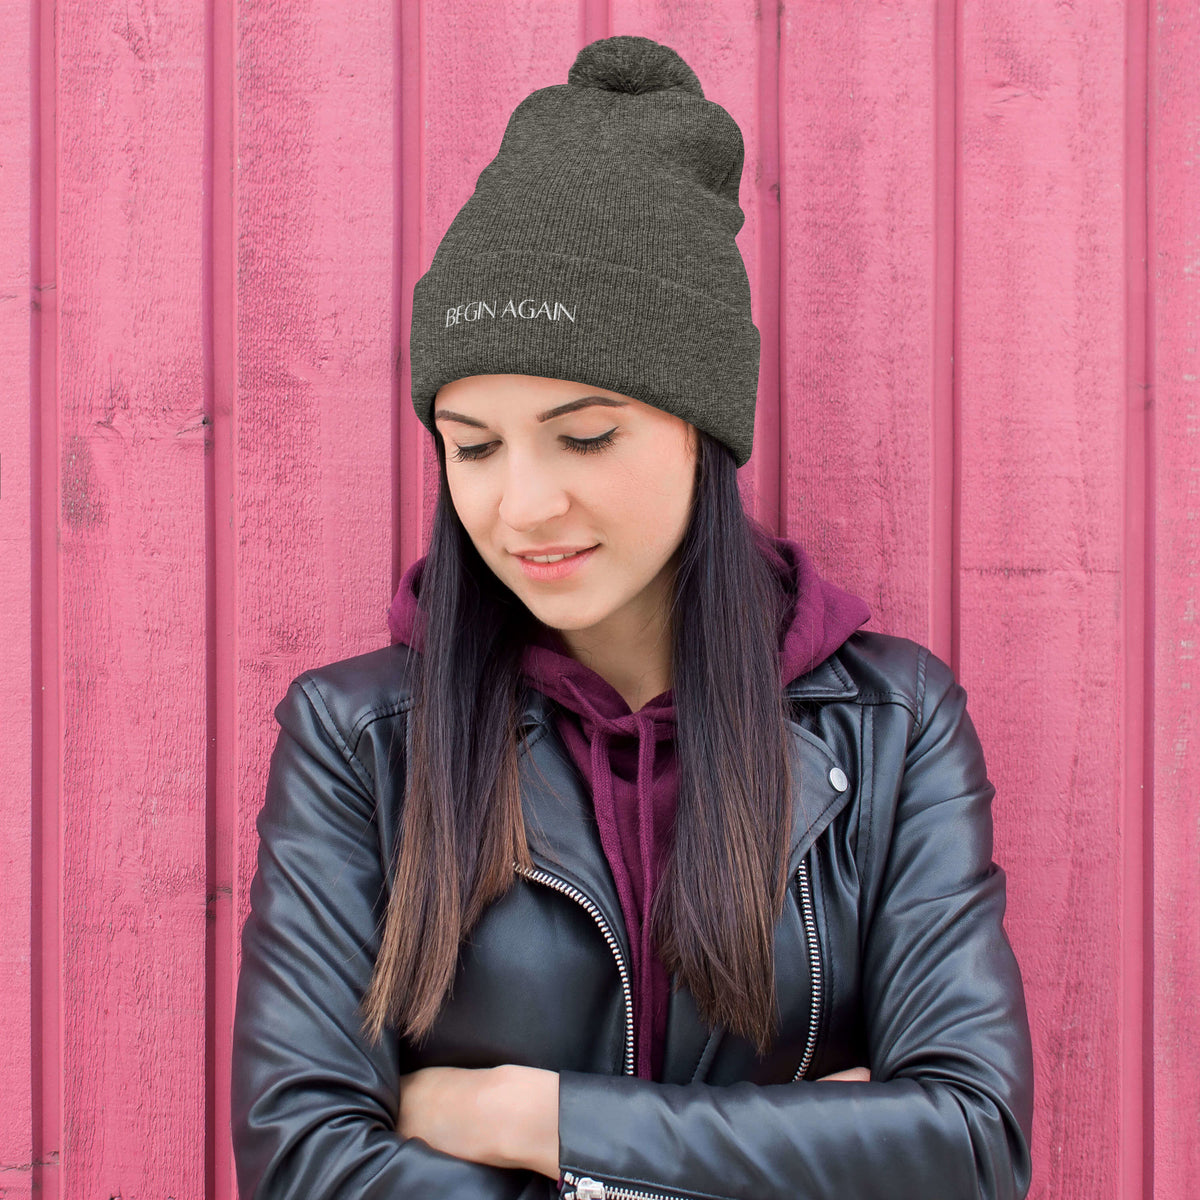 Woman standing in front of pink wall wearing a leather jacket and Begin Again beanie hat.